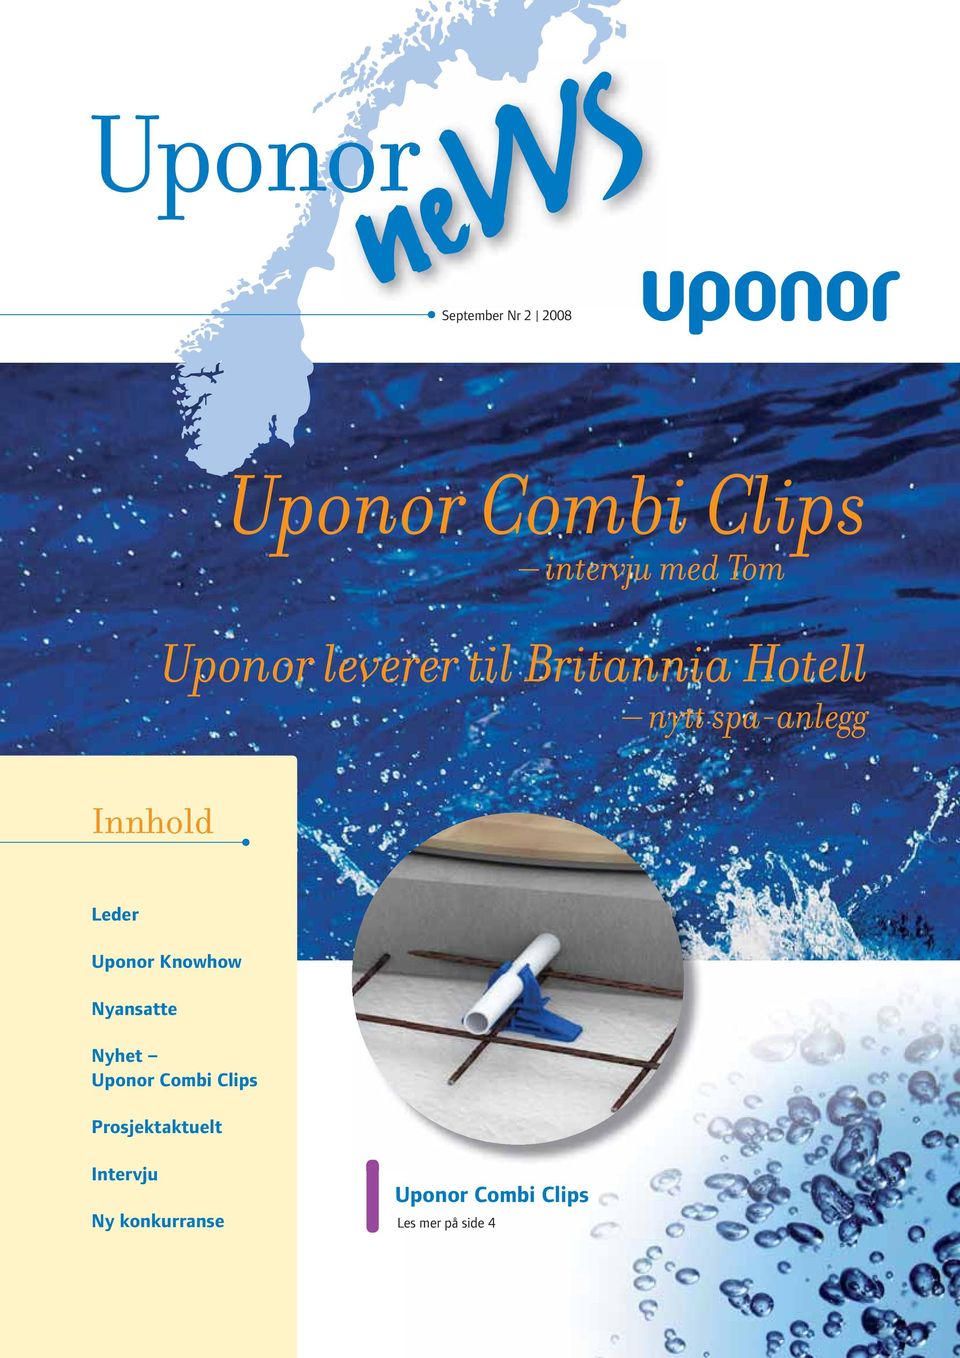 Leder Uponor Knowhow Nyansatte Nyhet Uponor Combi Clips